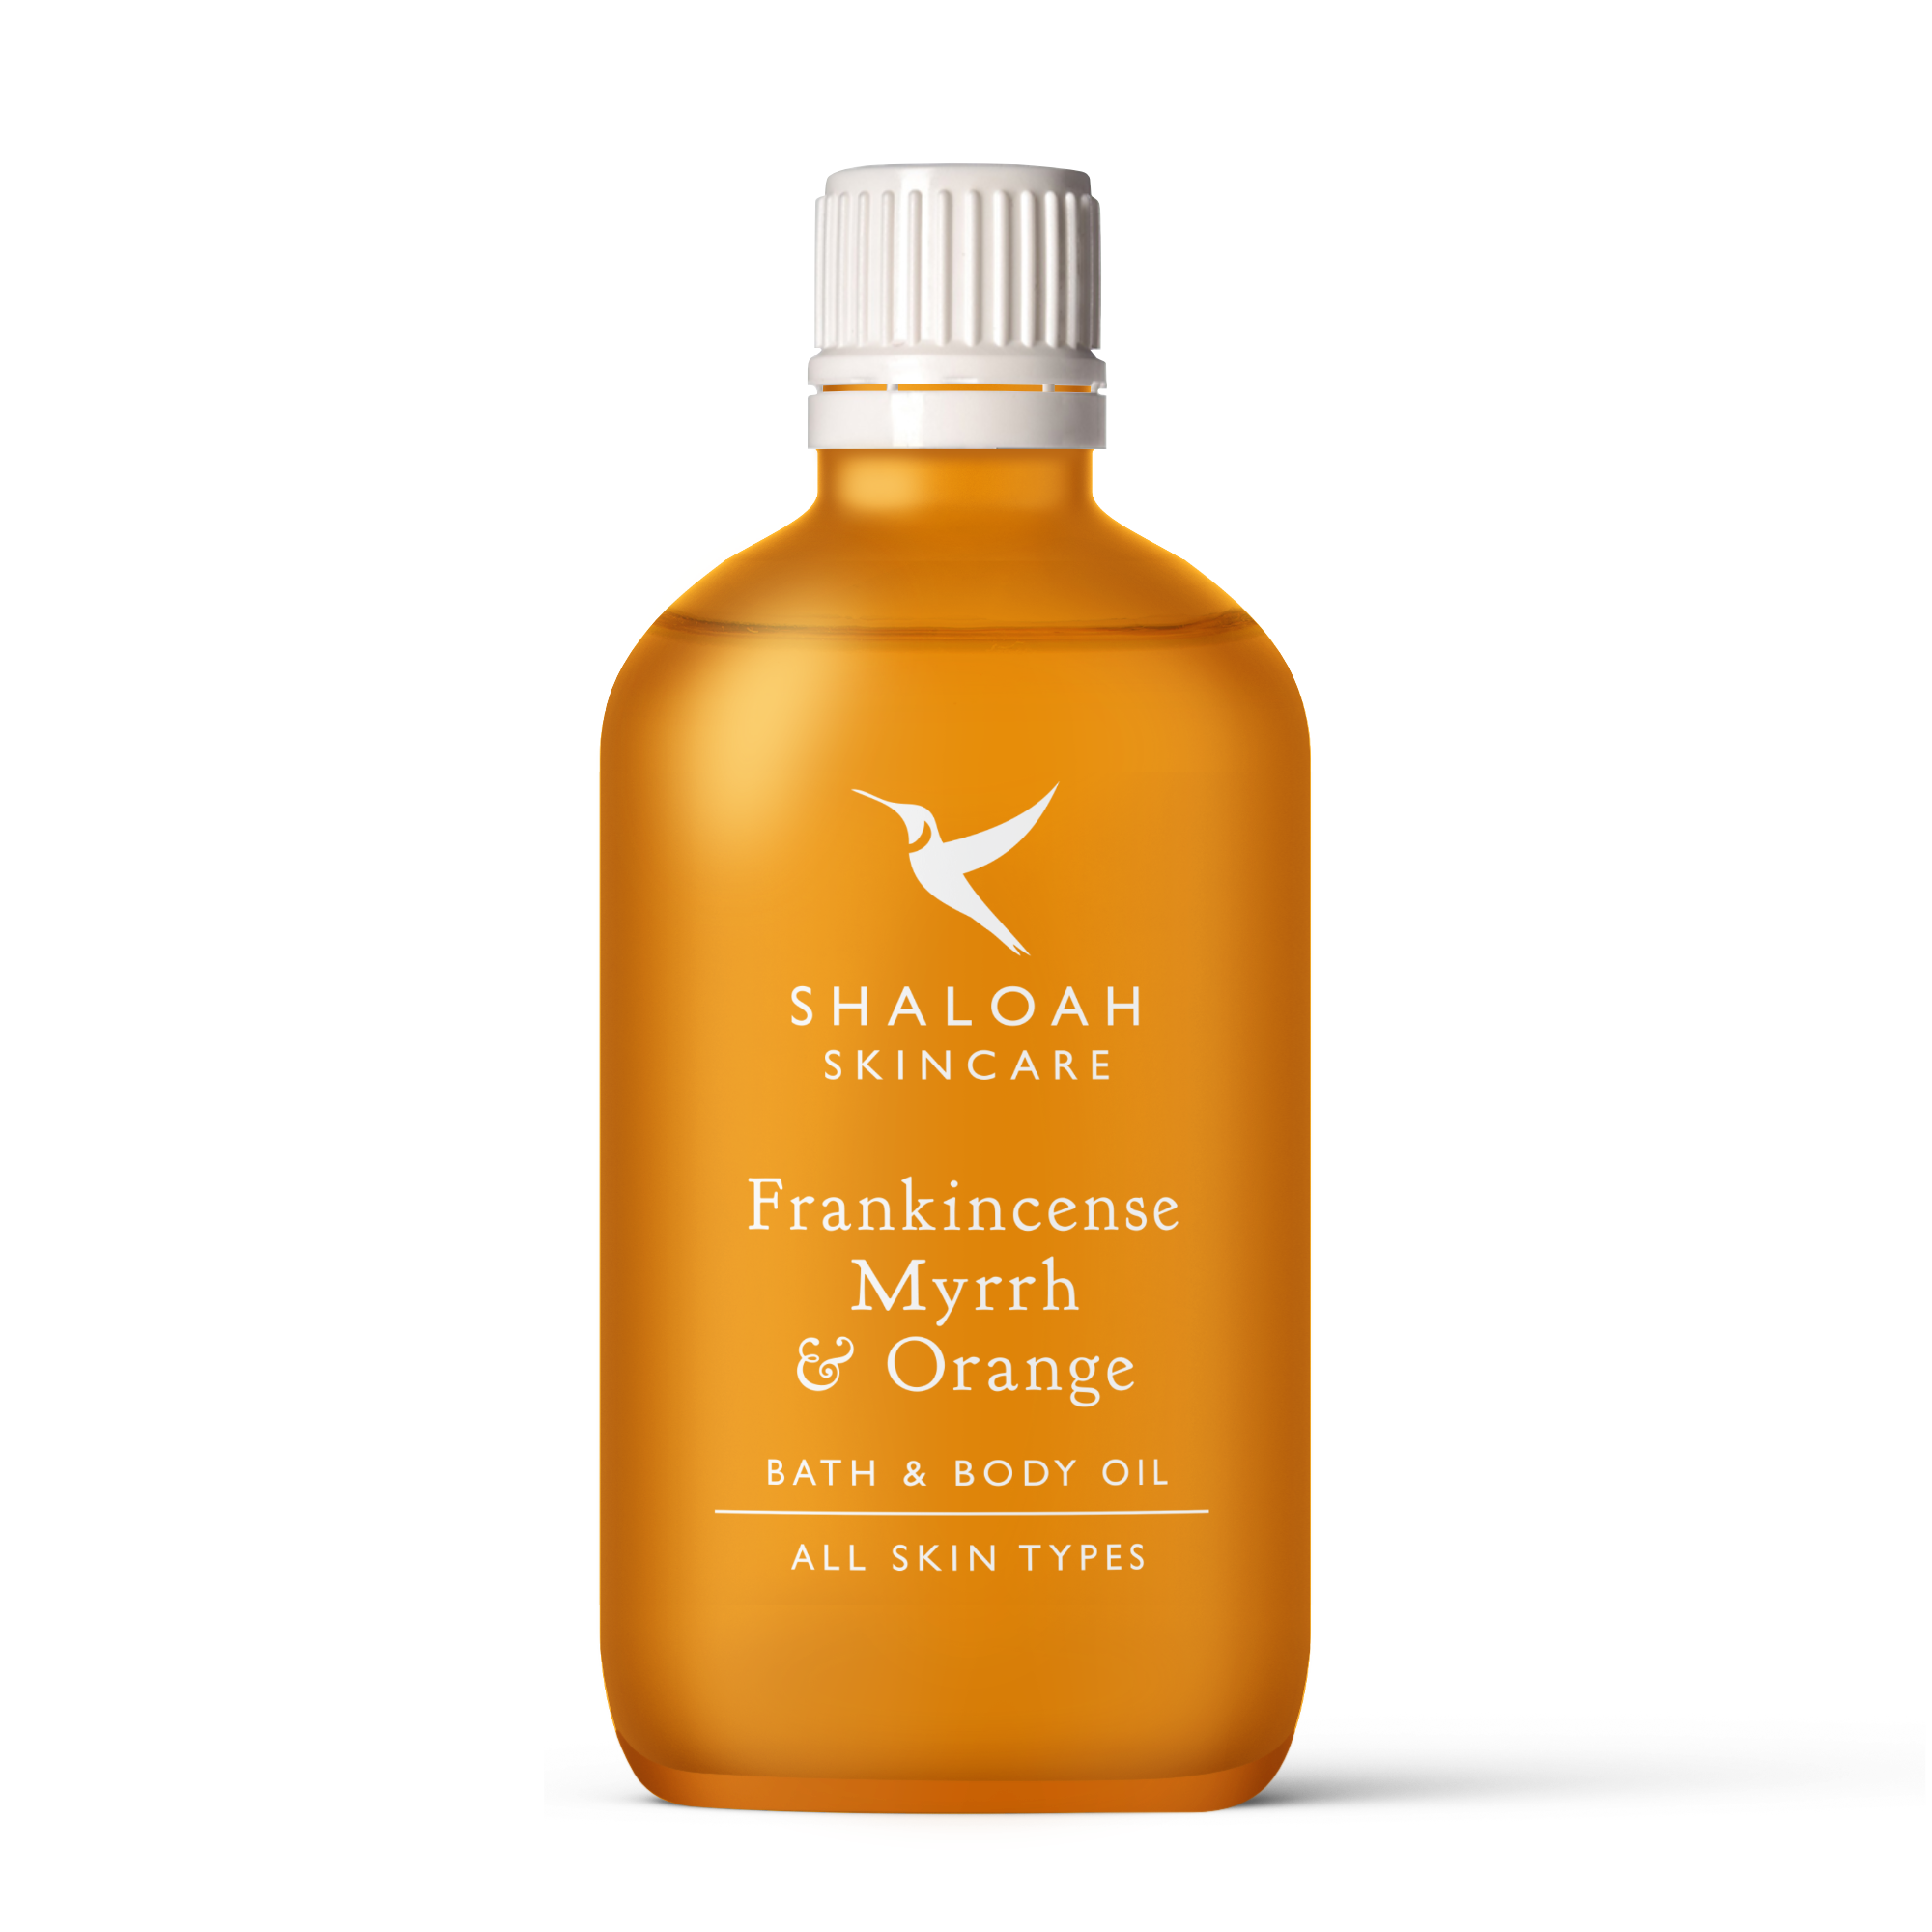 FRANKINCENSE MYRRH & ORANGE BATH & BODY OIL _ Organic Gifts _ Beauty Products _ Mother's Day _ Body Care _ Easter _ Amber Glow _ Spa Gift _ Summer _ Stocking Filler _ Spring _ Bright _ Colour _ Summer _ Sustainable.jpg